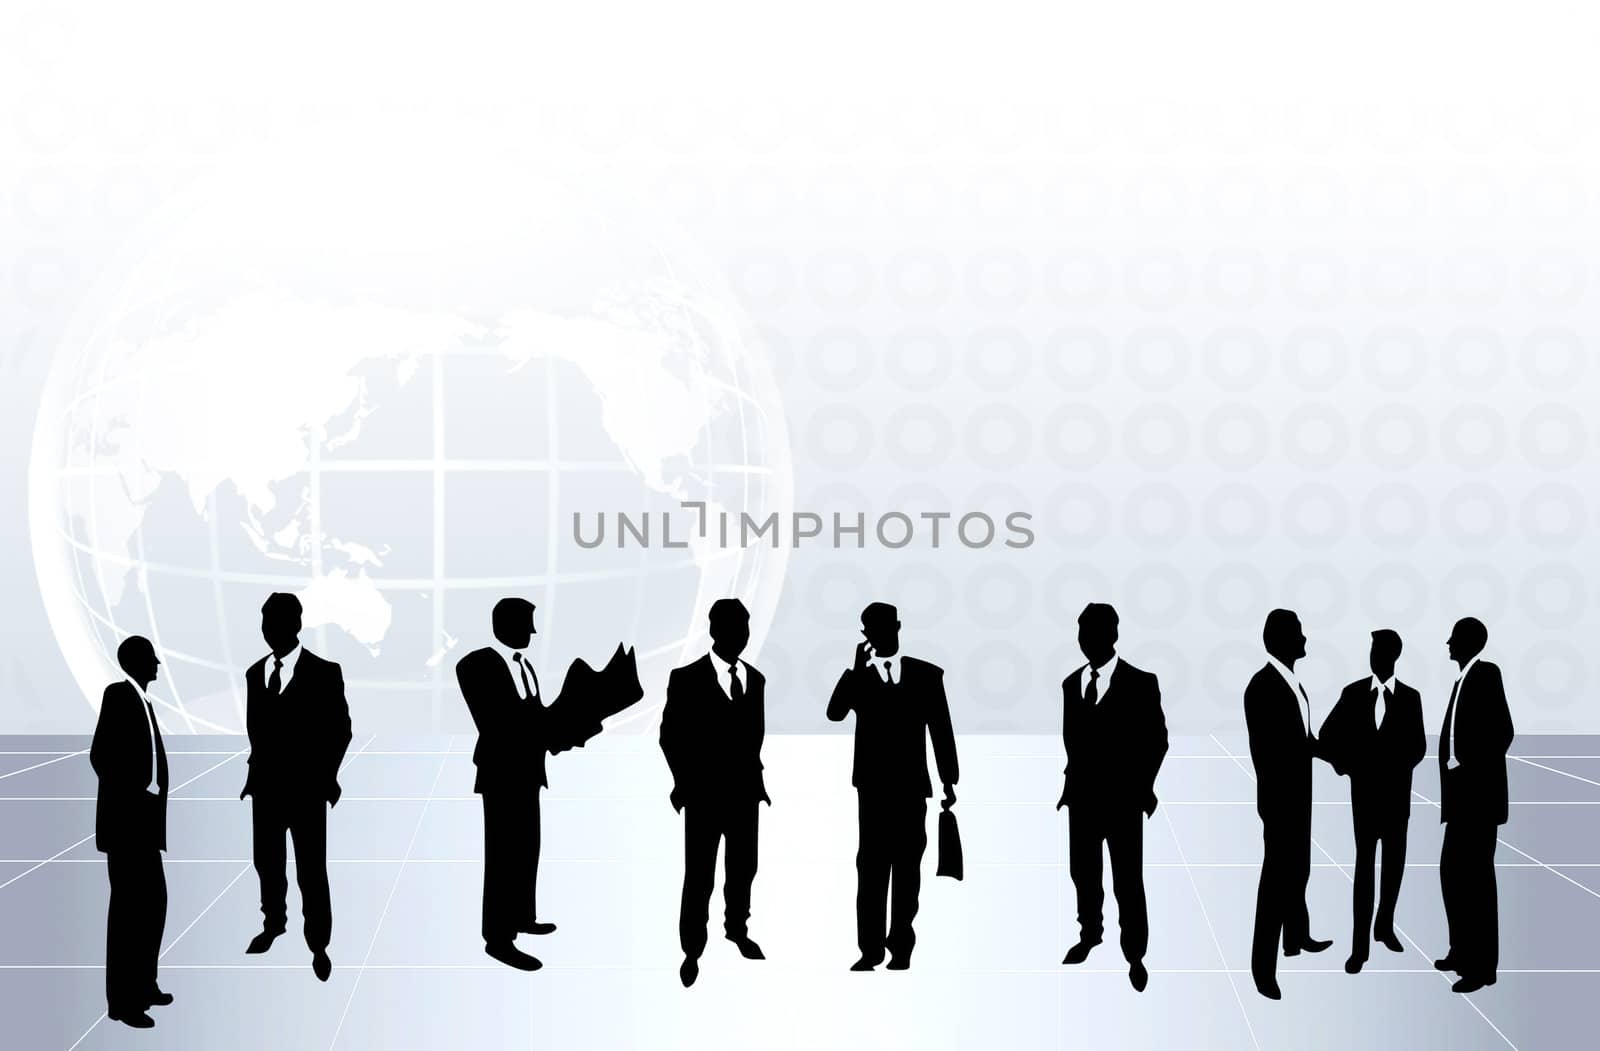 BusineSilhouettes of business people ssmen standing in front of an earth map